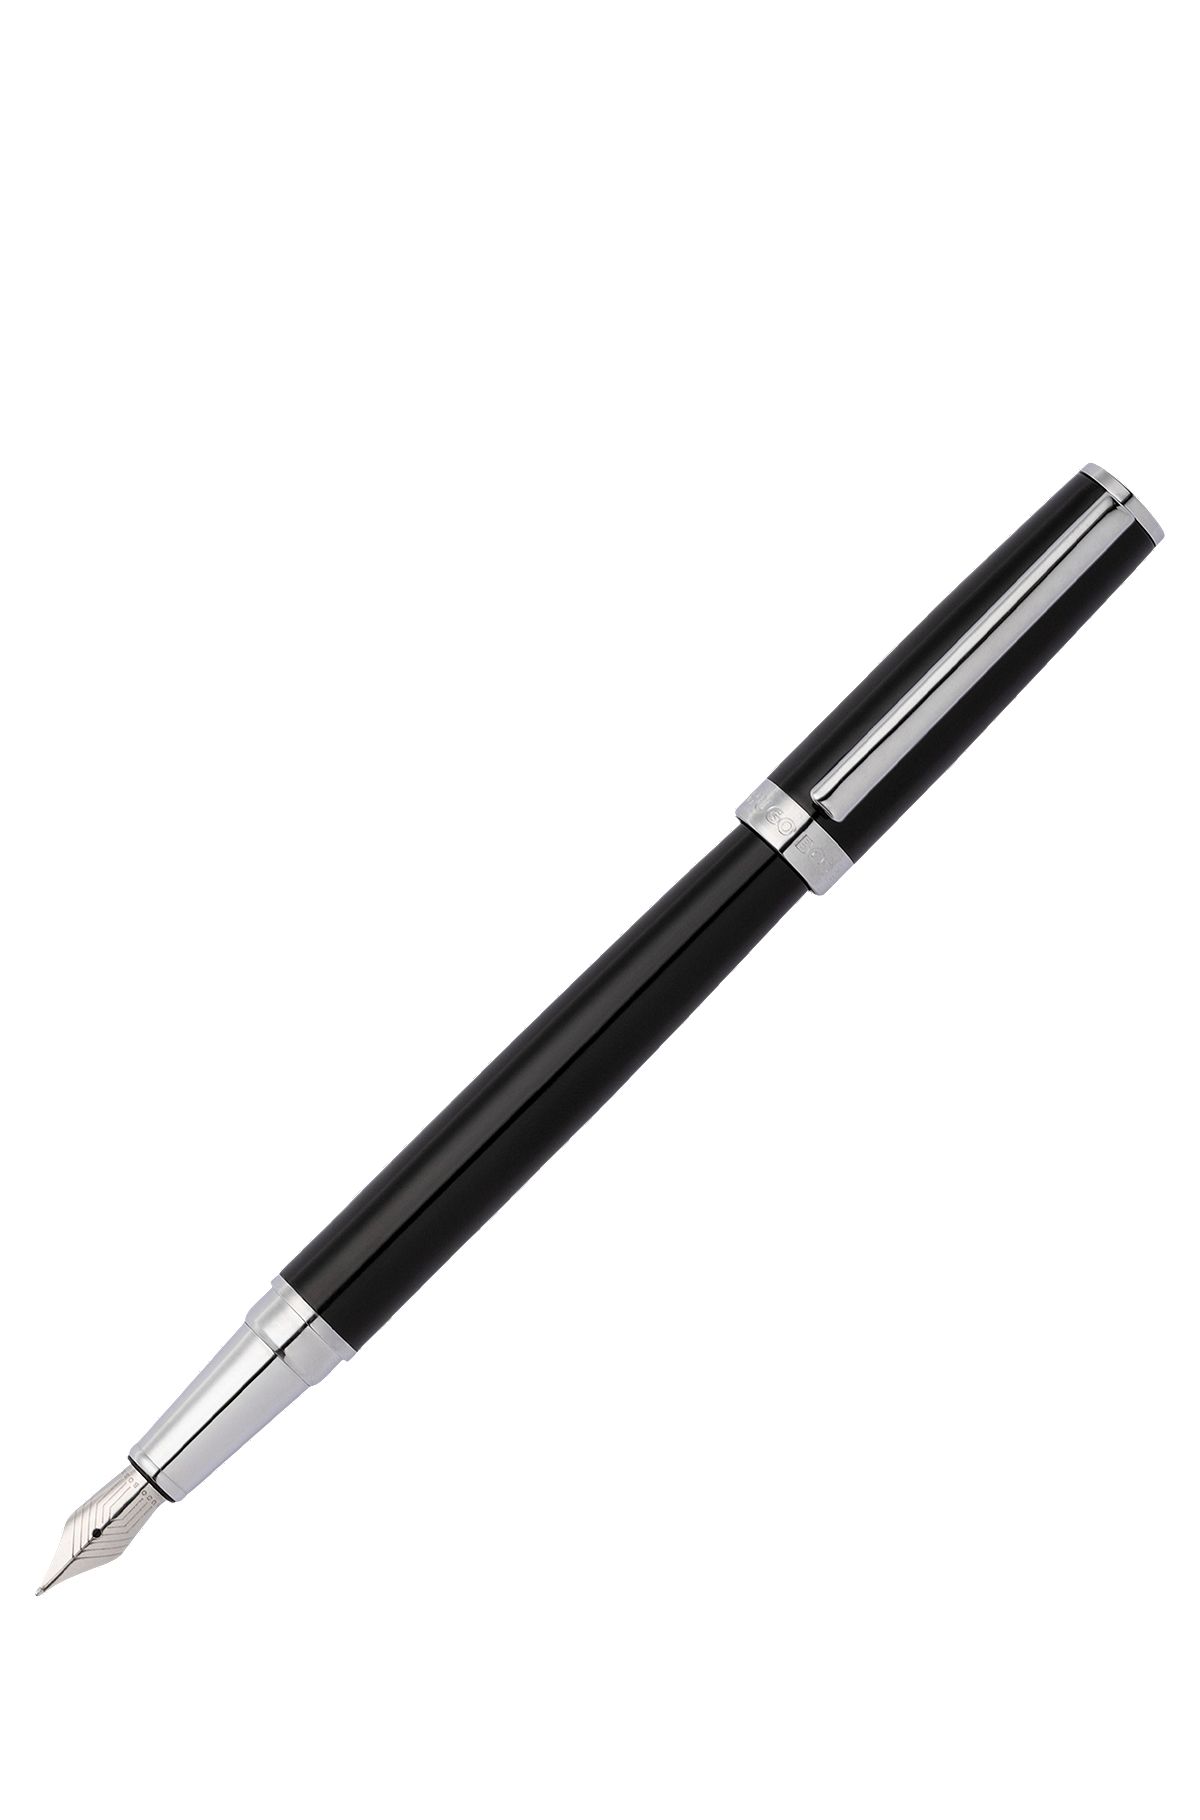 Glossy-black lacquer fountain pen with logo ring, Black